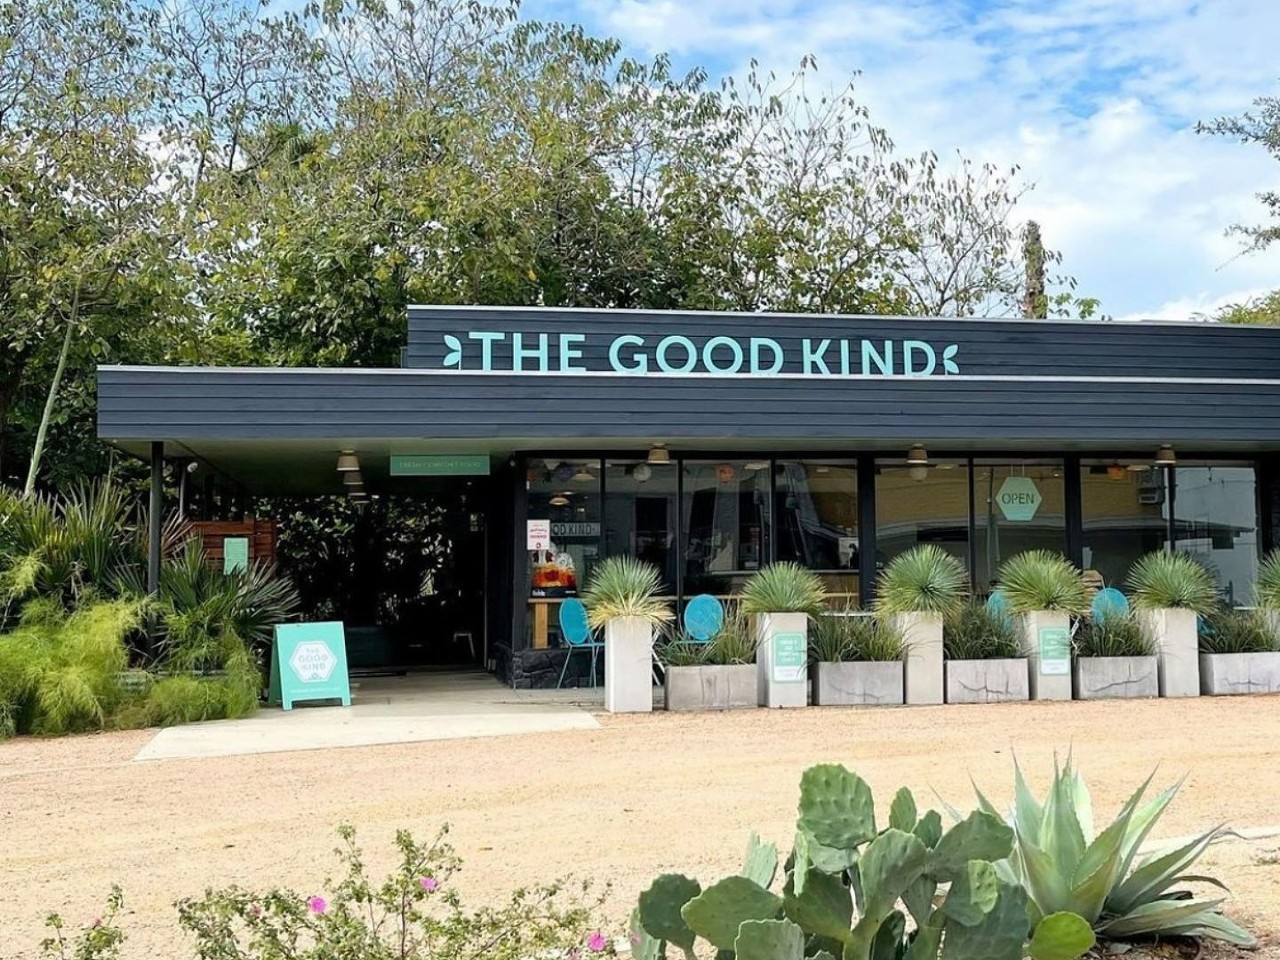 The Good Kind
1127 S. St. Mary's St., (210) 801-5892, eatgoodkind.com
Not only does The Good Kind offer a great spot for fresh and local eats — they've also got a consistent lineup of on-site events, such as a Saturday farmers market and Wednesday night karaoke. It never hurts to check out the events calendar before heading over to see what else might be brewing.